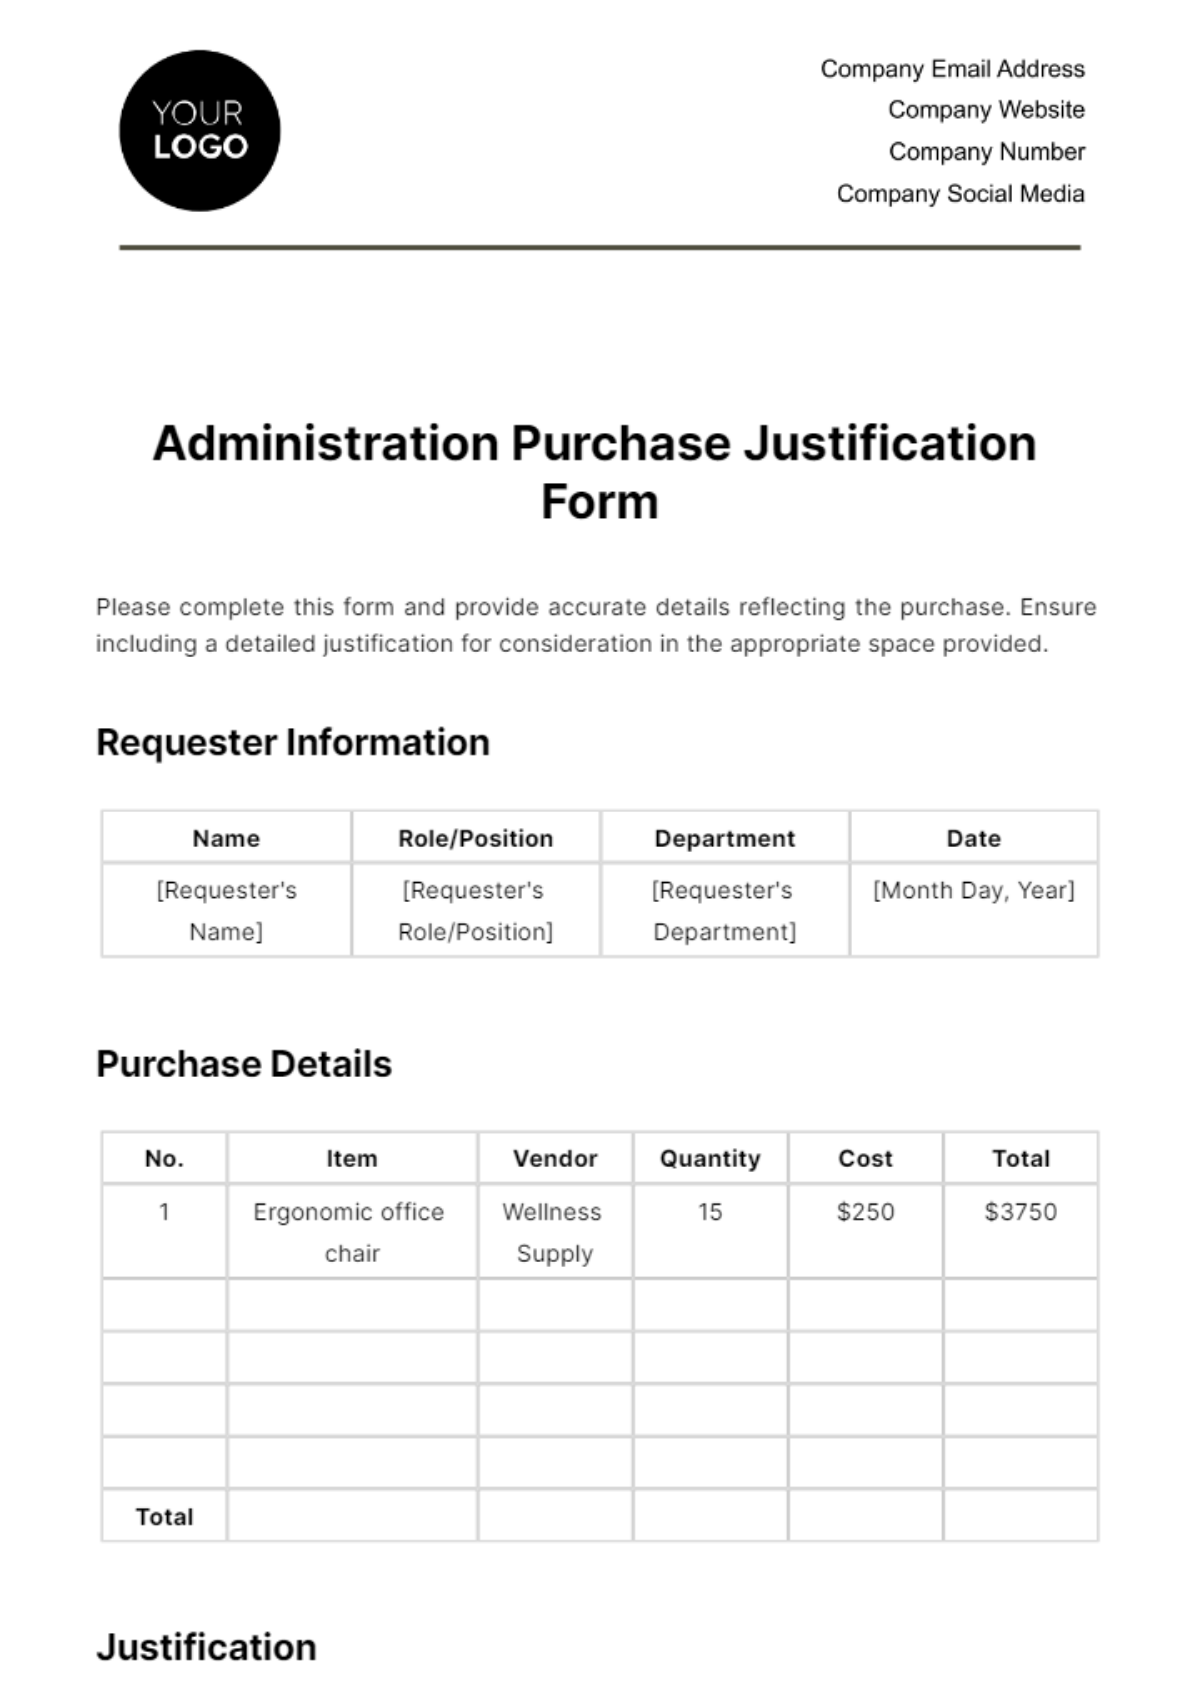 Administration Purchase Justification Form Template